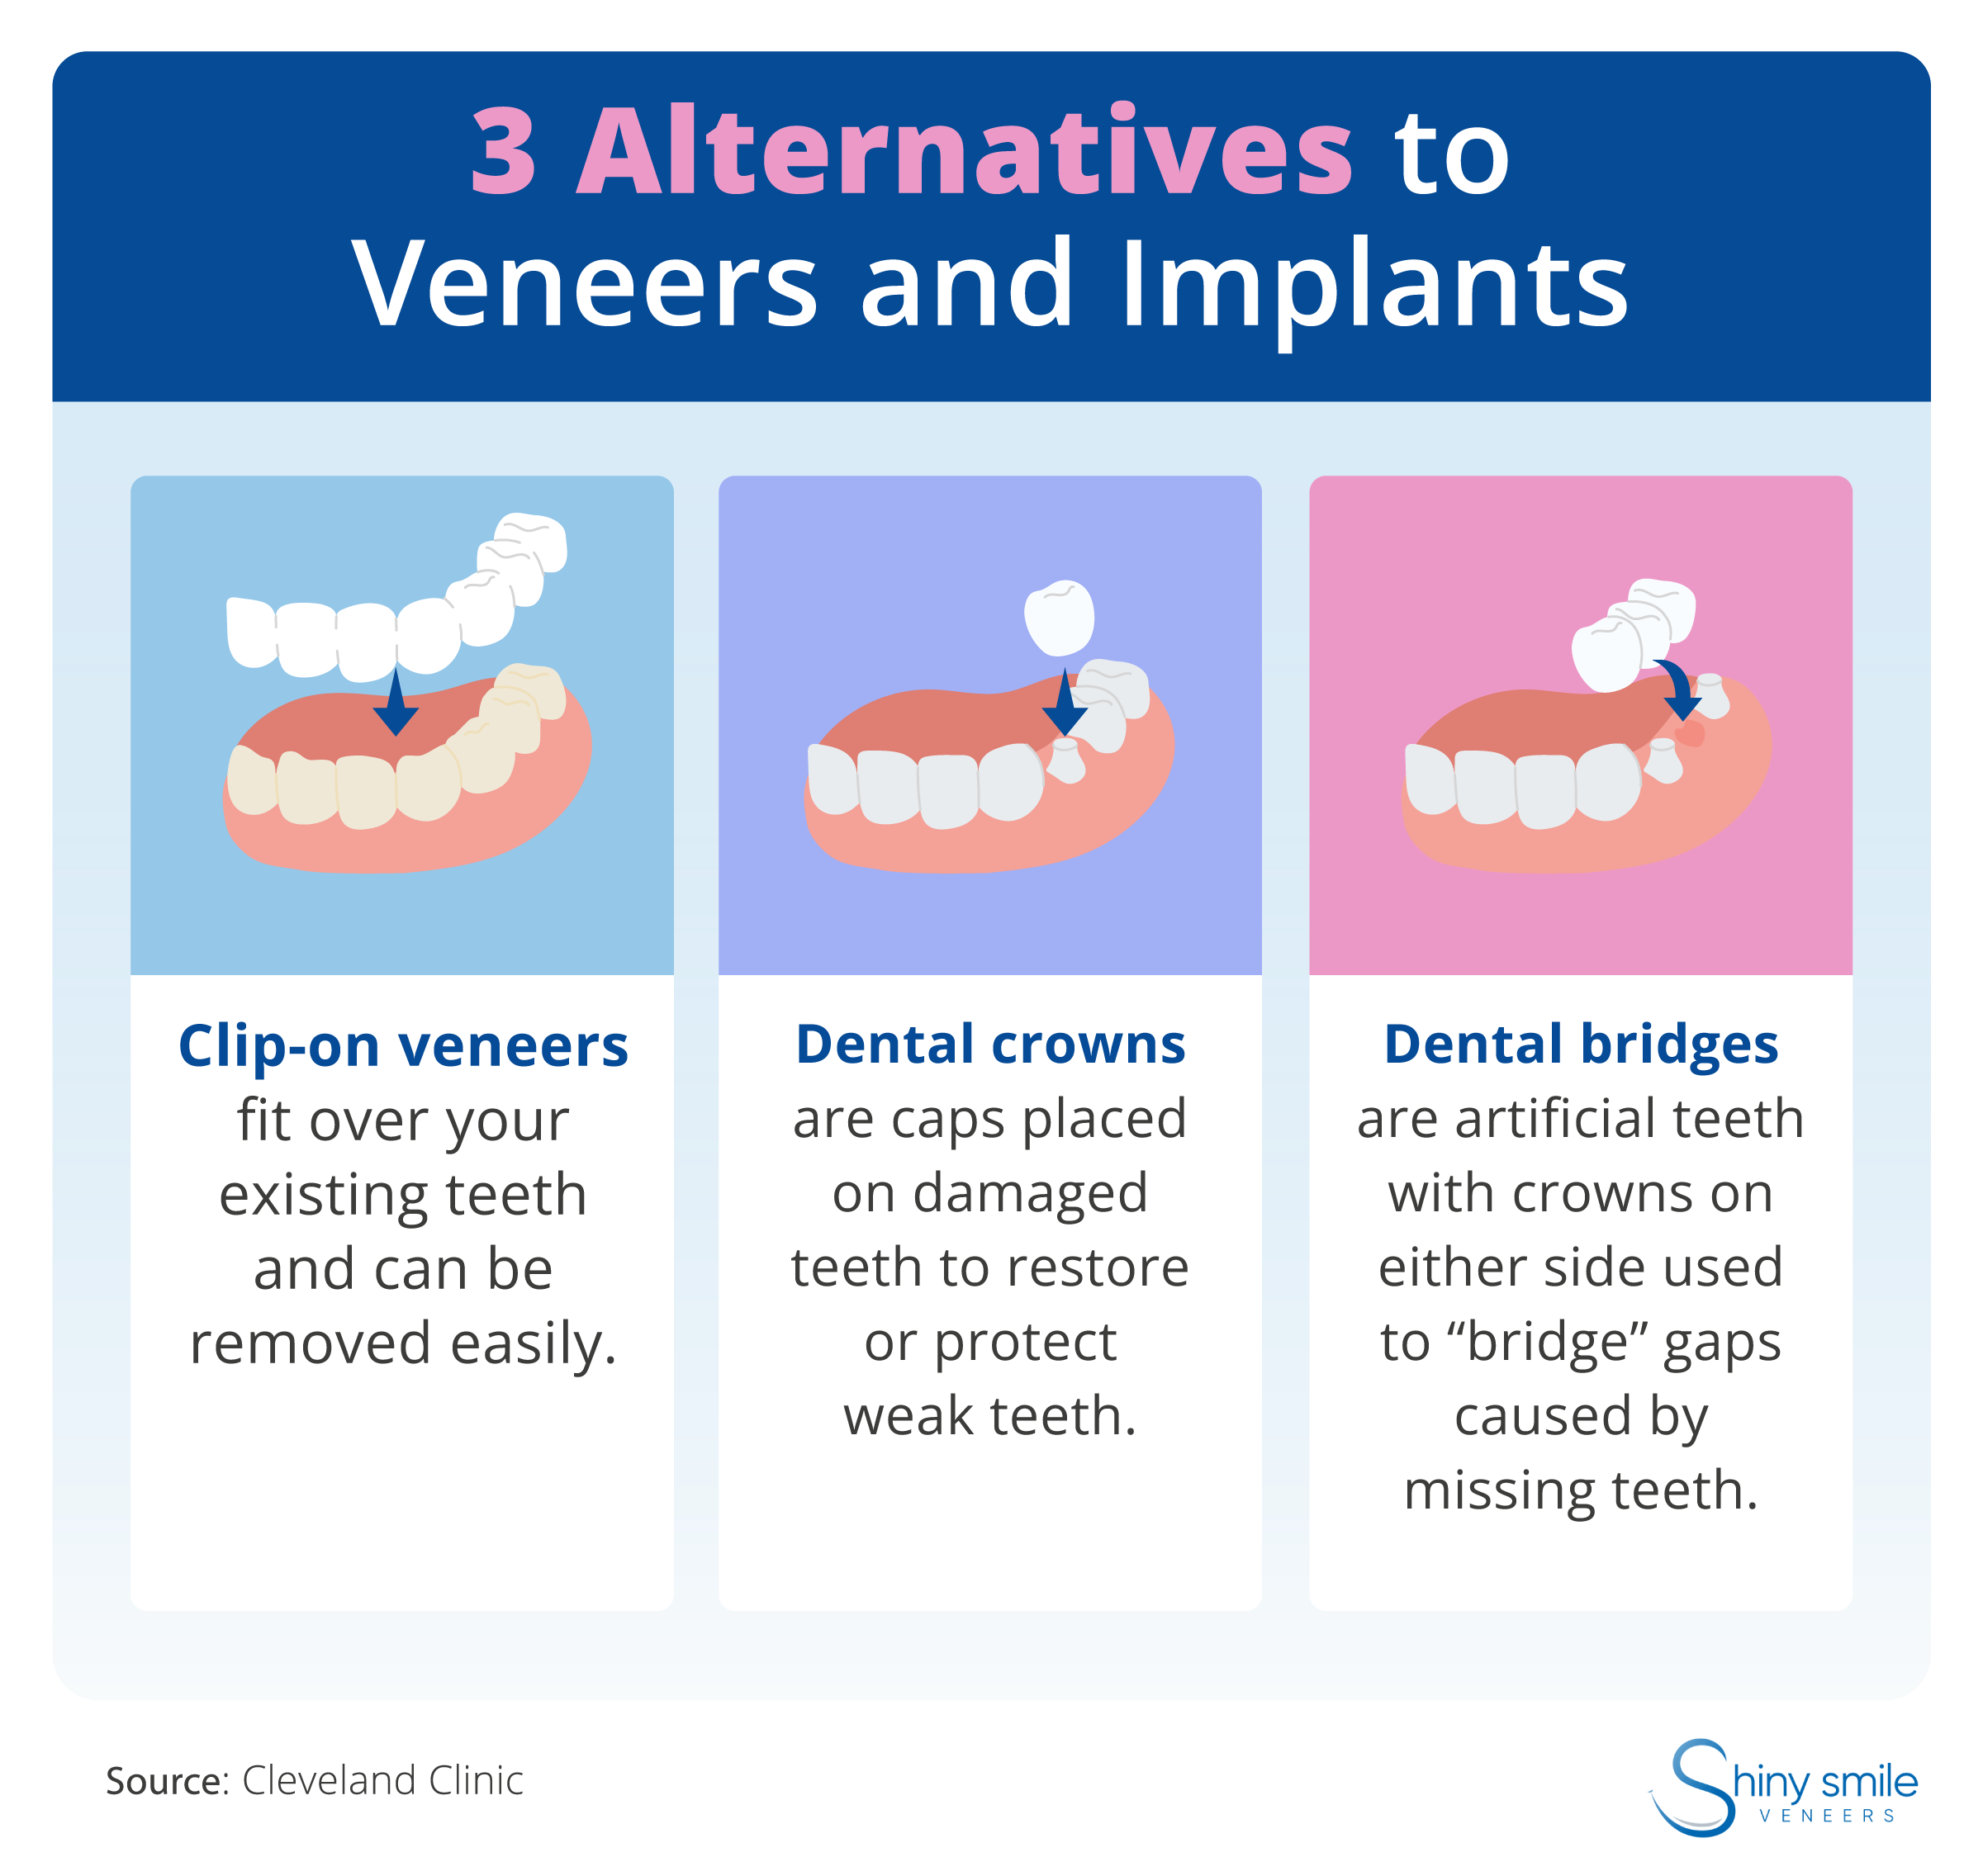 A list of alternatives to veneers and implants 